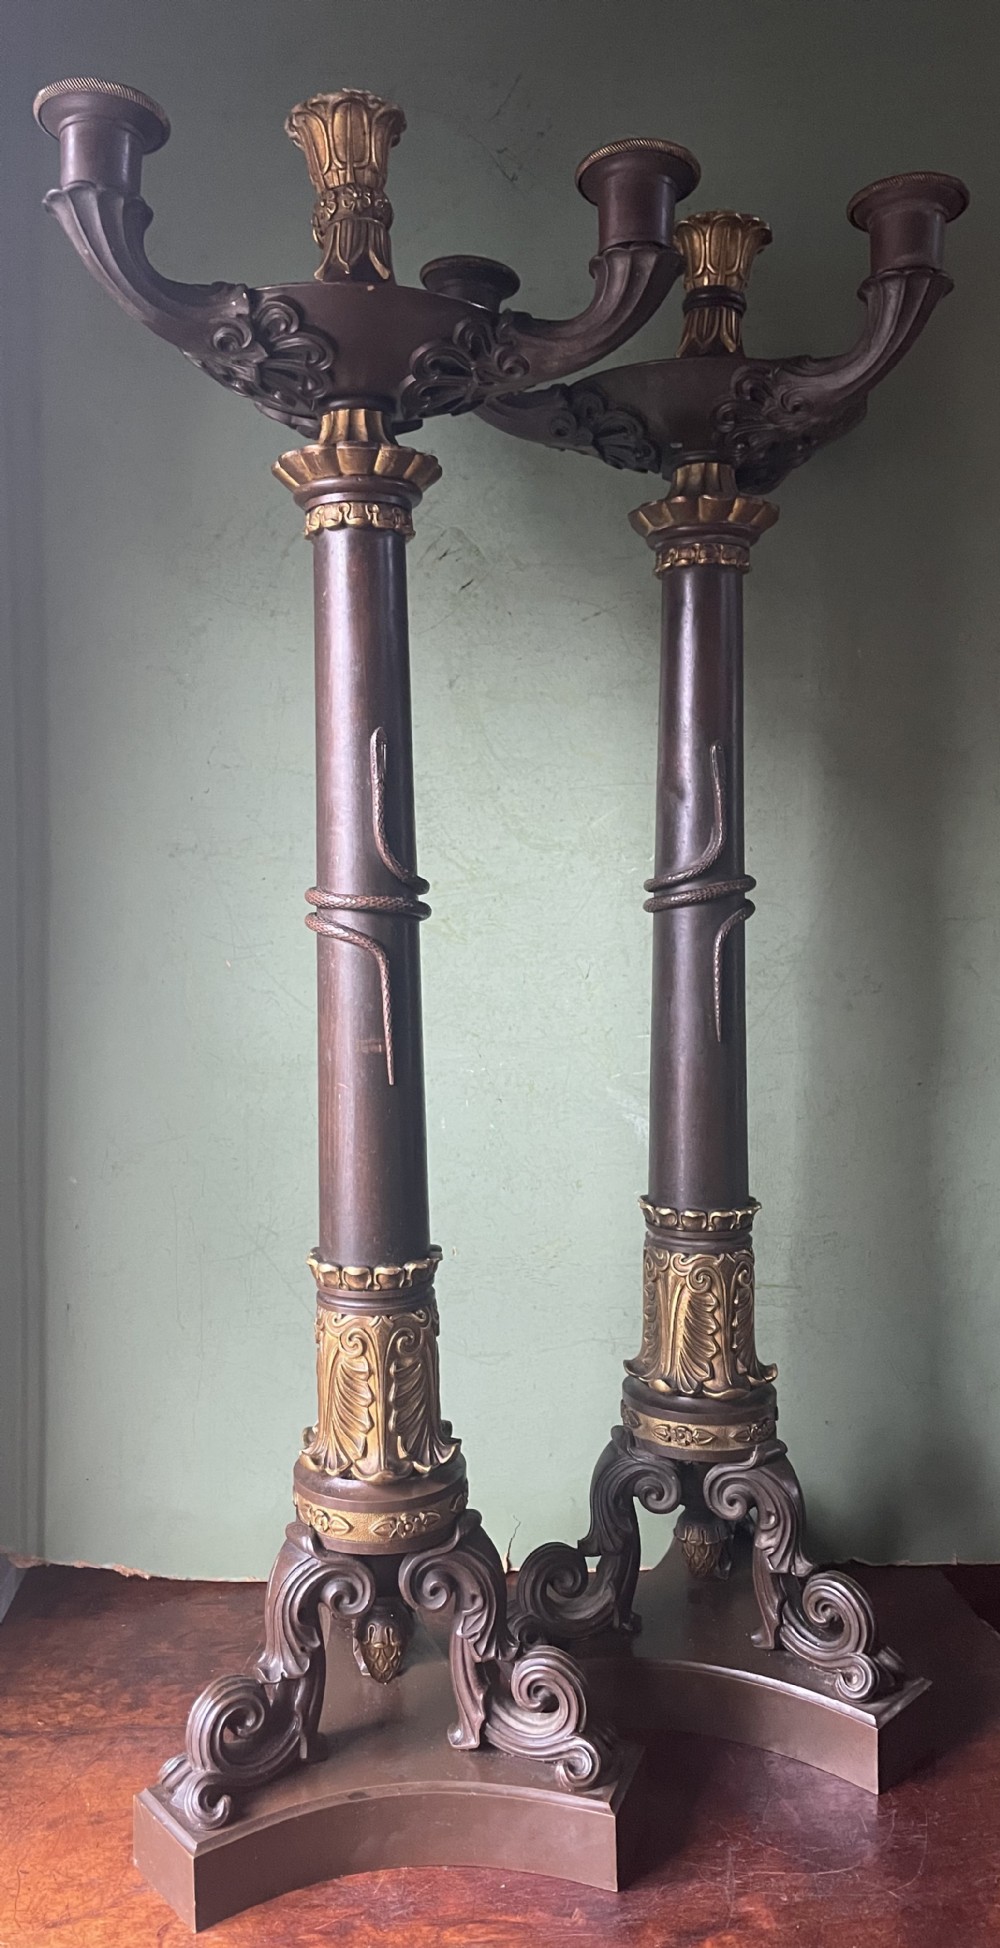 impressive large scale pair of early c19th french restauration period bronze and ormolu candelabra